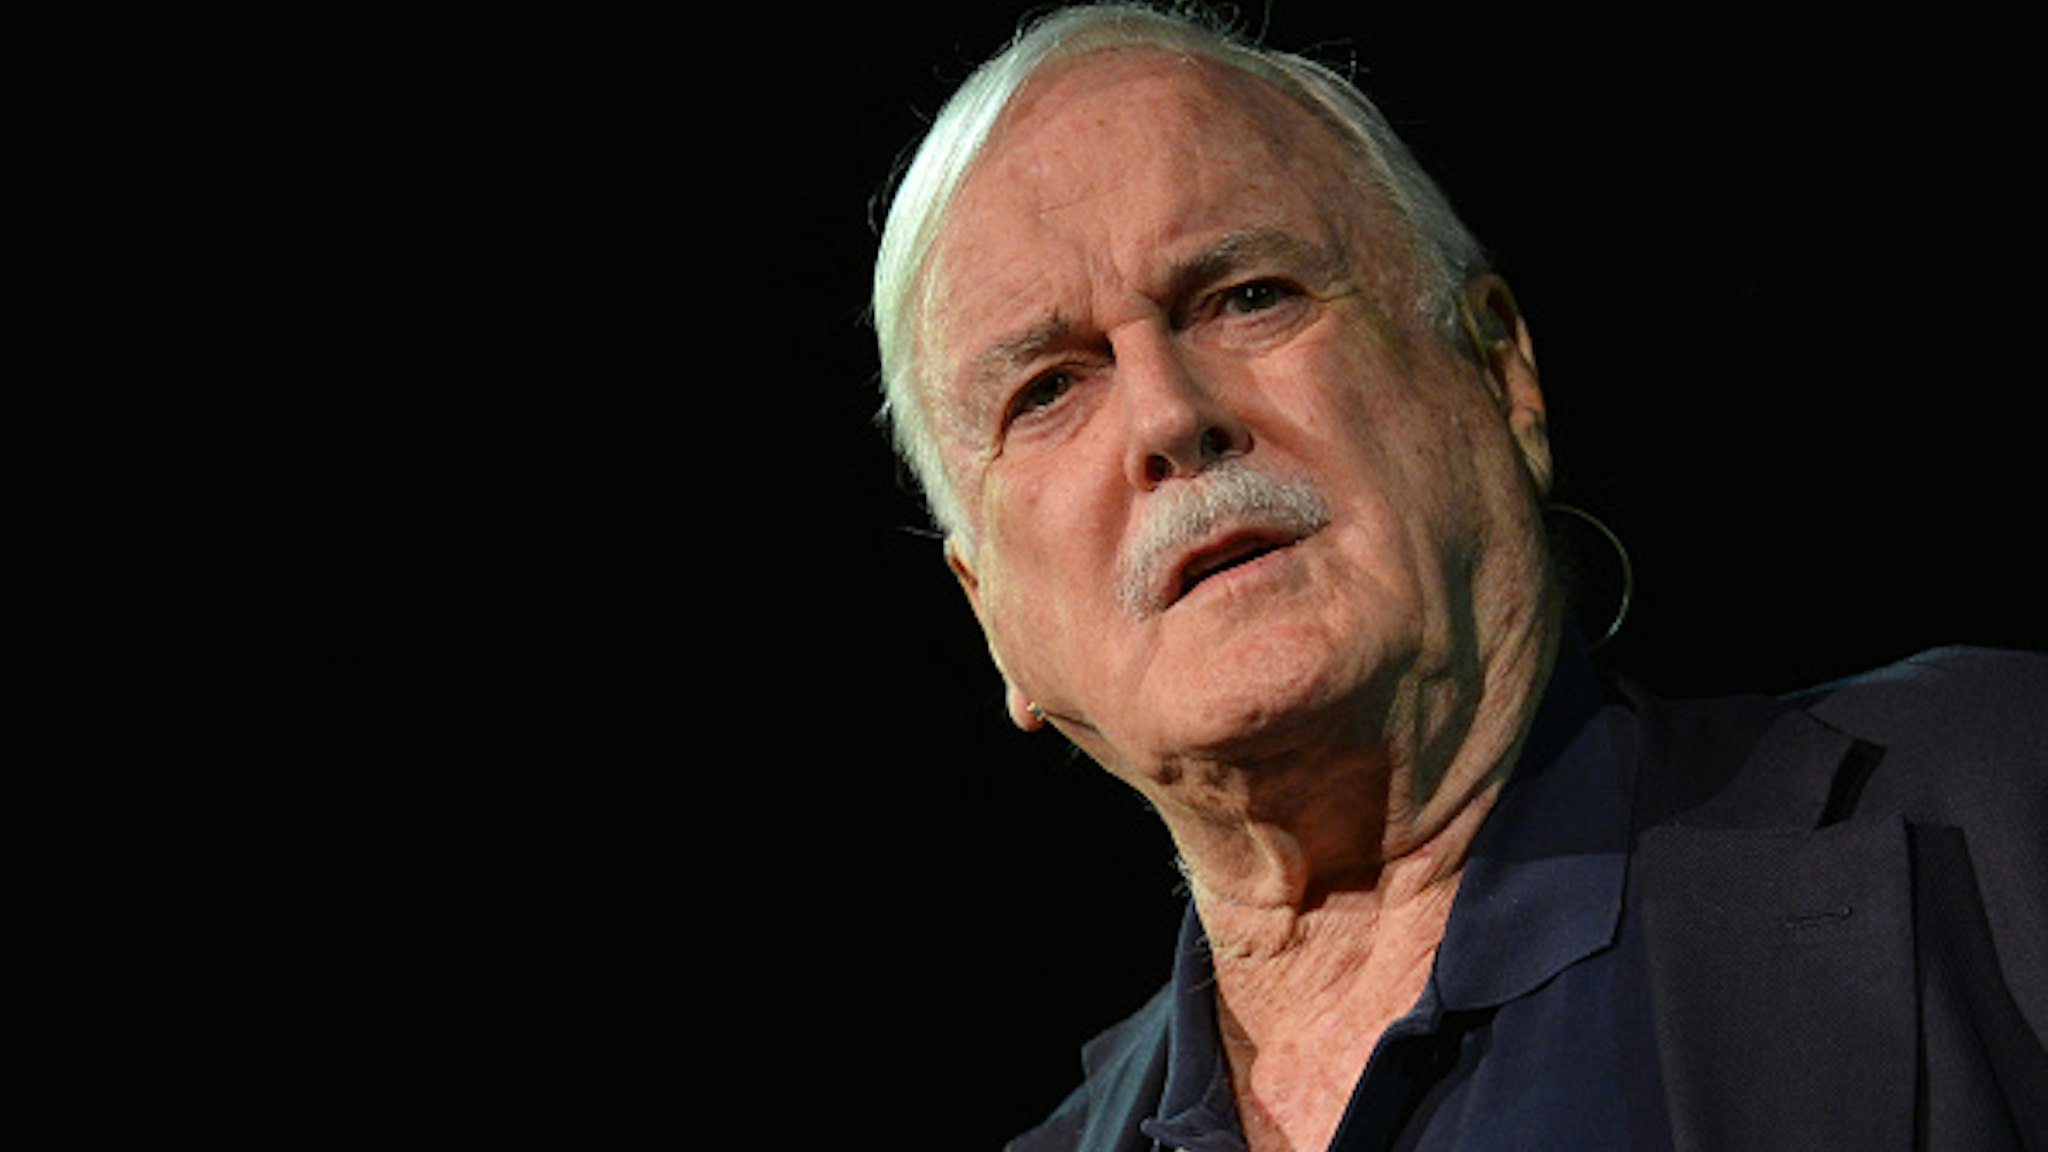 John Cleese, an English actor, comedian, screenwriter, and producer speaks at Pendulum Summit, World's Leading Business &amp; Self Empowerment Summit, in Dublin Convention Center. On Thursday, January 10, 2019, in Dublin, Ireland.